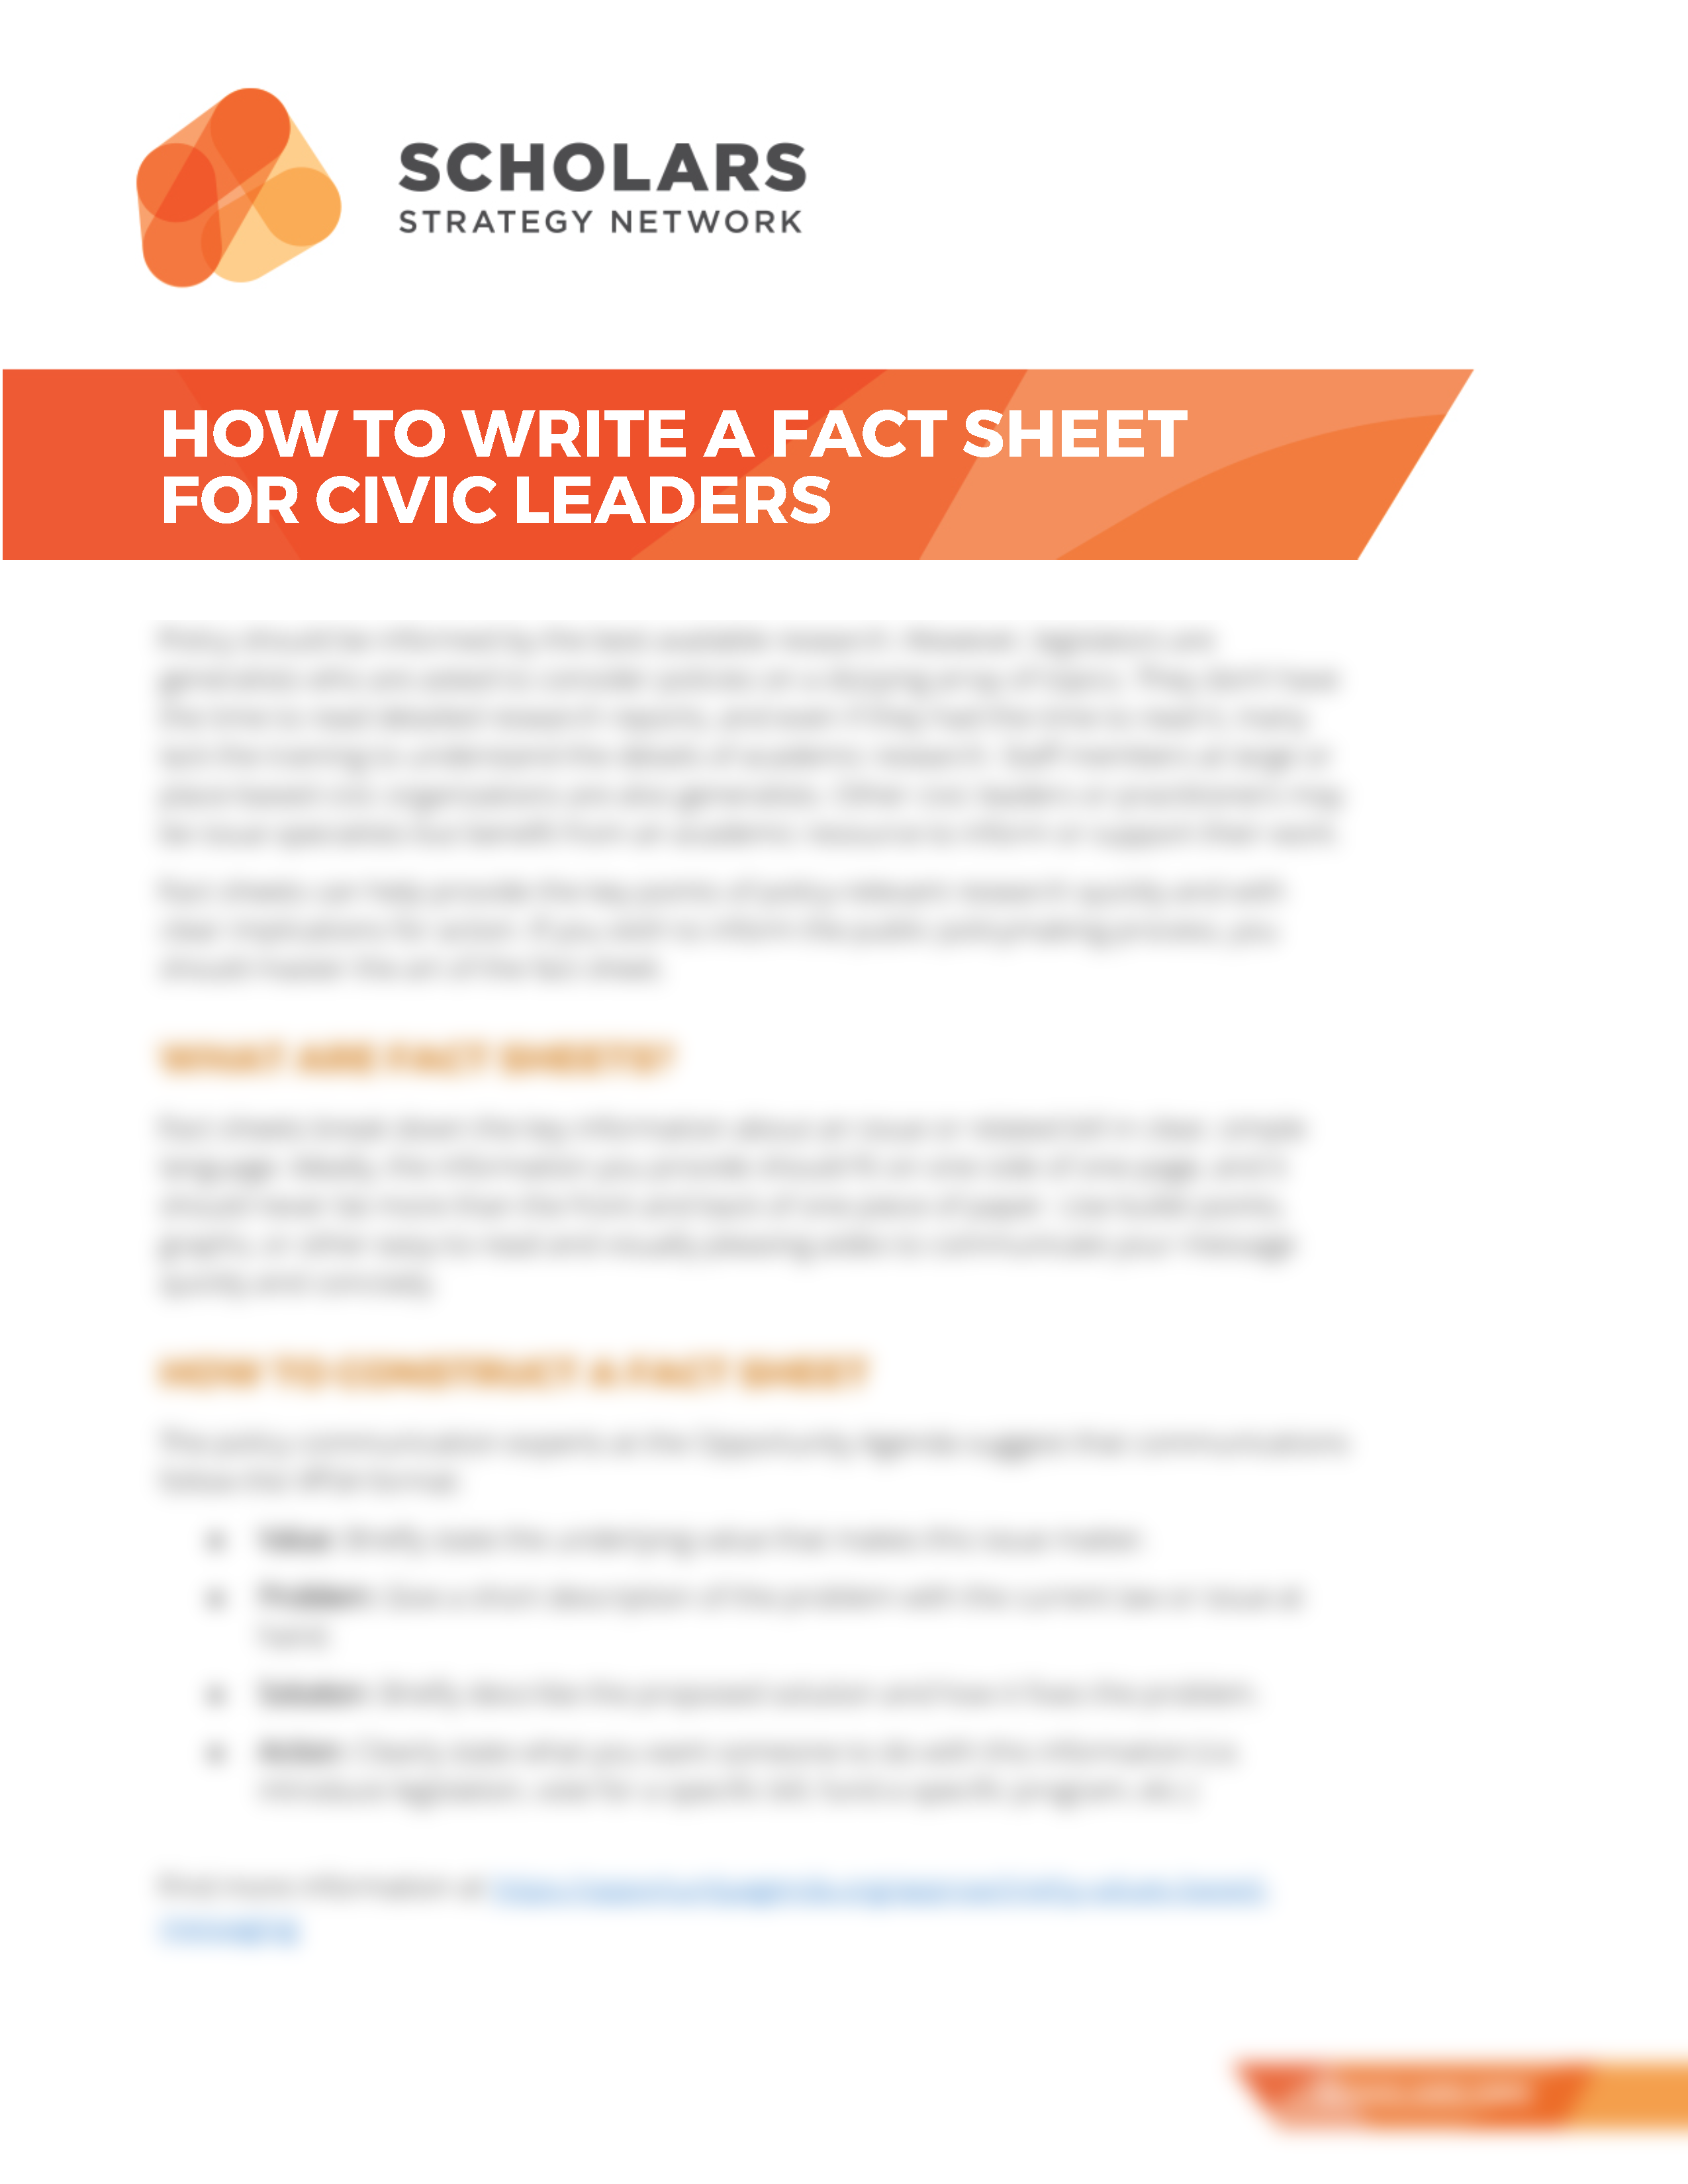 How To: Best Practices for Writing Influential Policy Fact Sheets